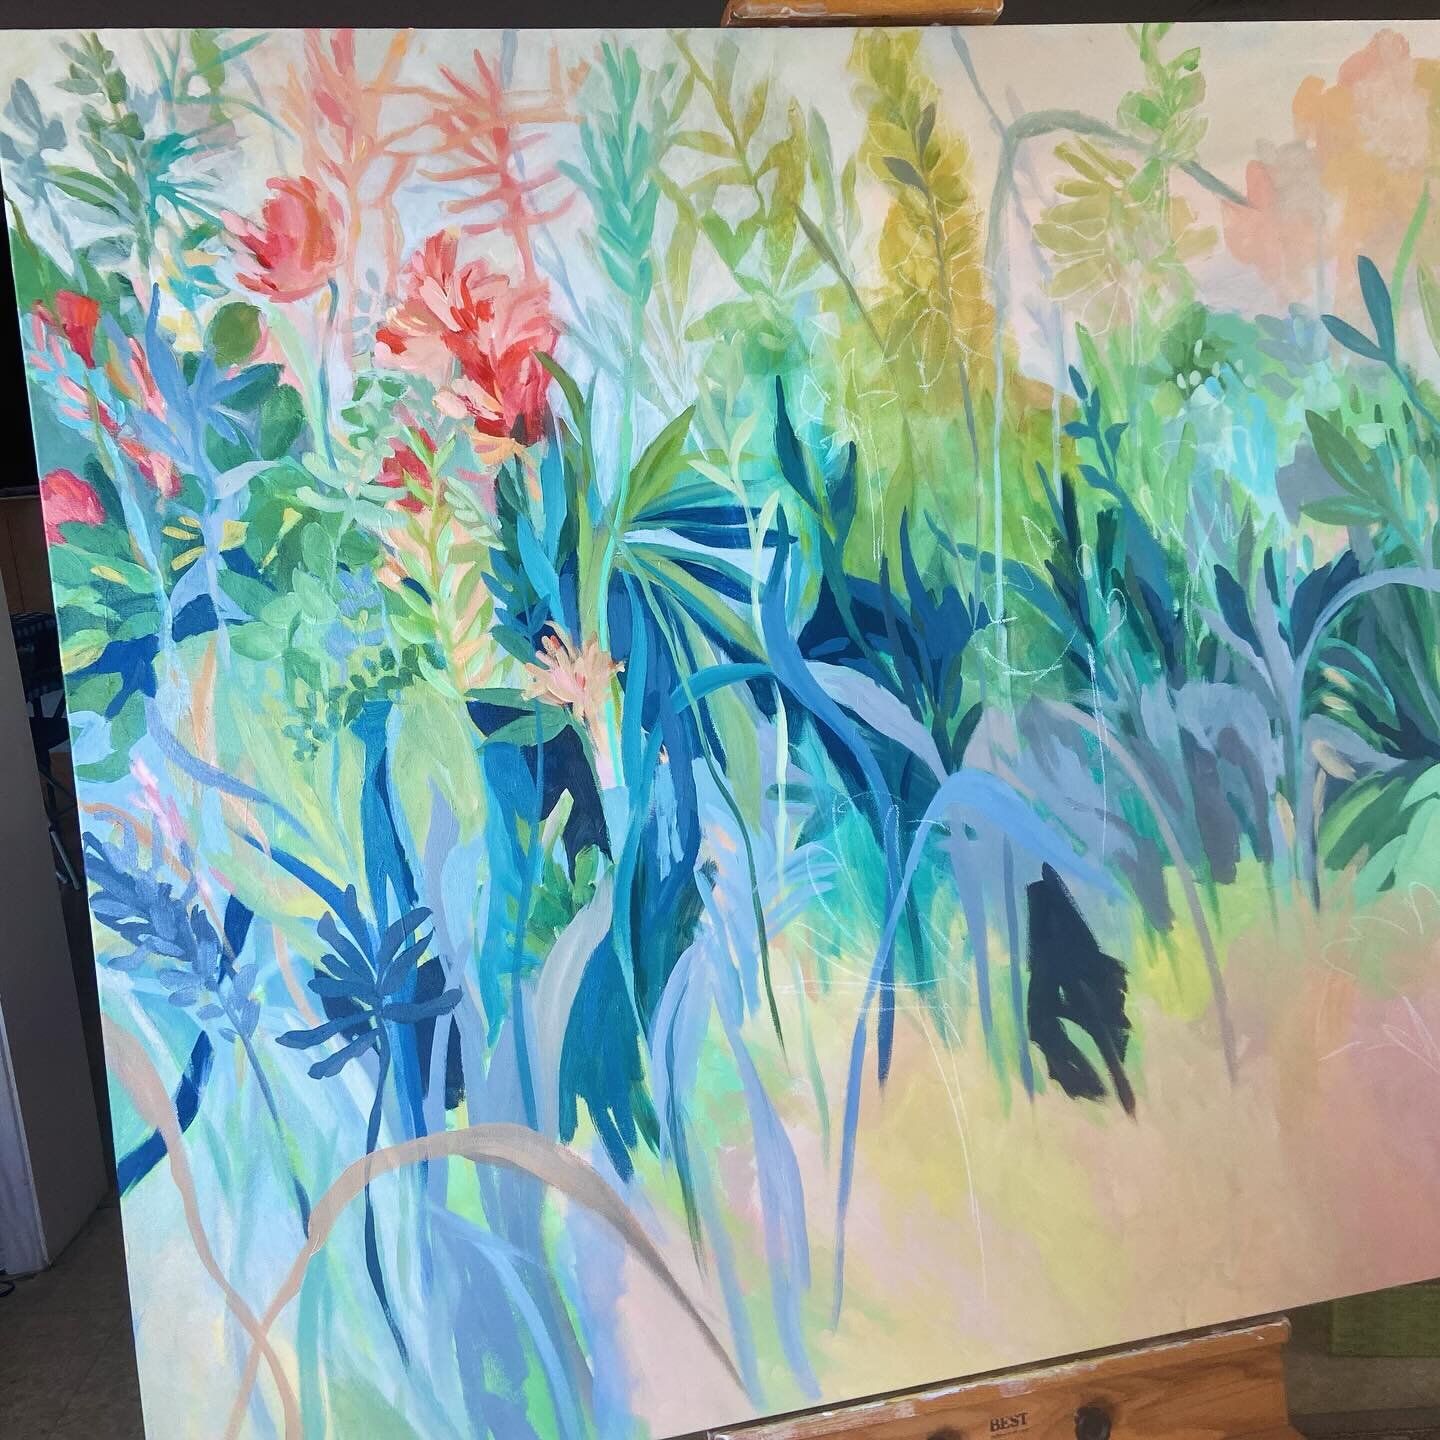 Finally making some progress on this gigantic bad boy. Swipe for closeup. Organic orange- Wow! I forgot the gorgeousness of that color! largepainting #colorfulgarden #bold #colorfull #floral #acrylicpainting #joycesheltonstudio